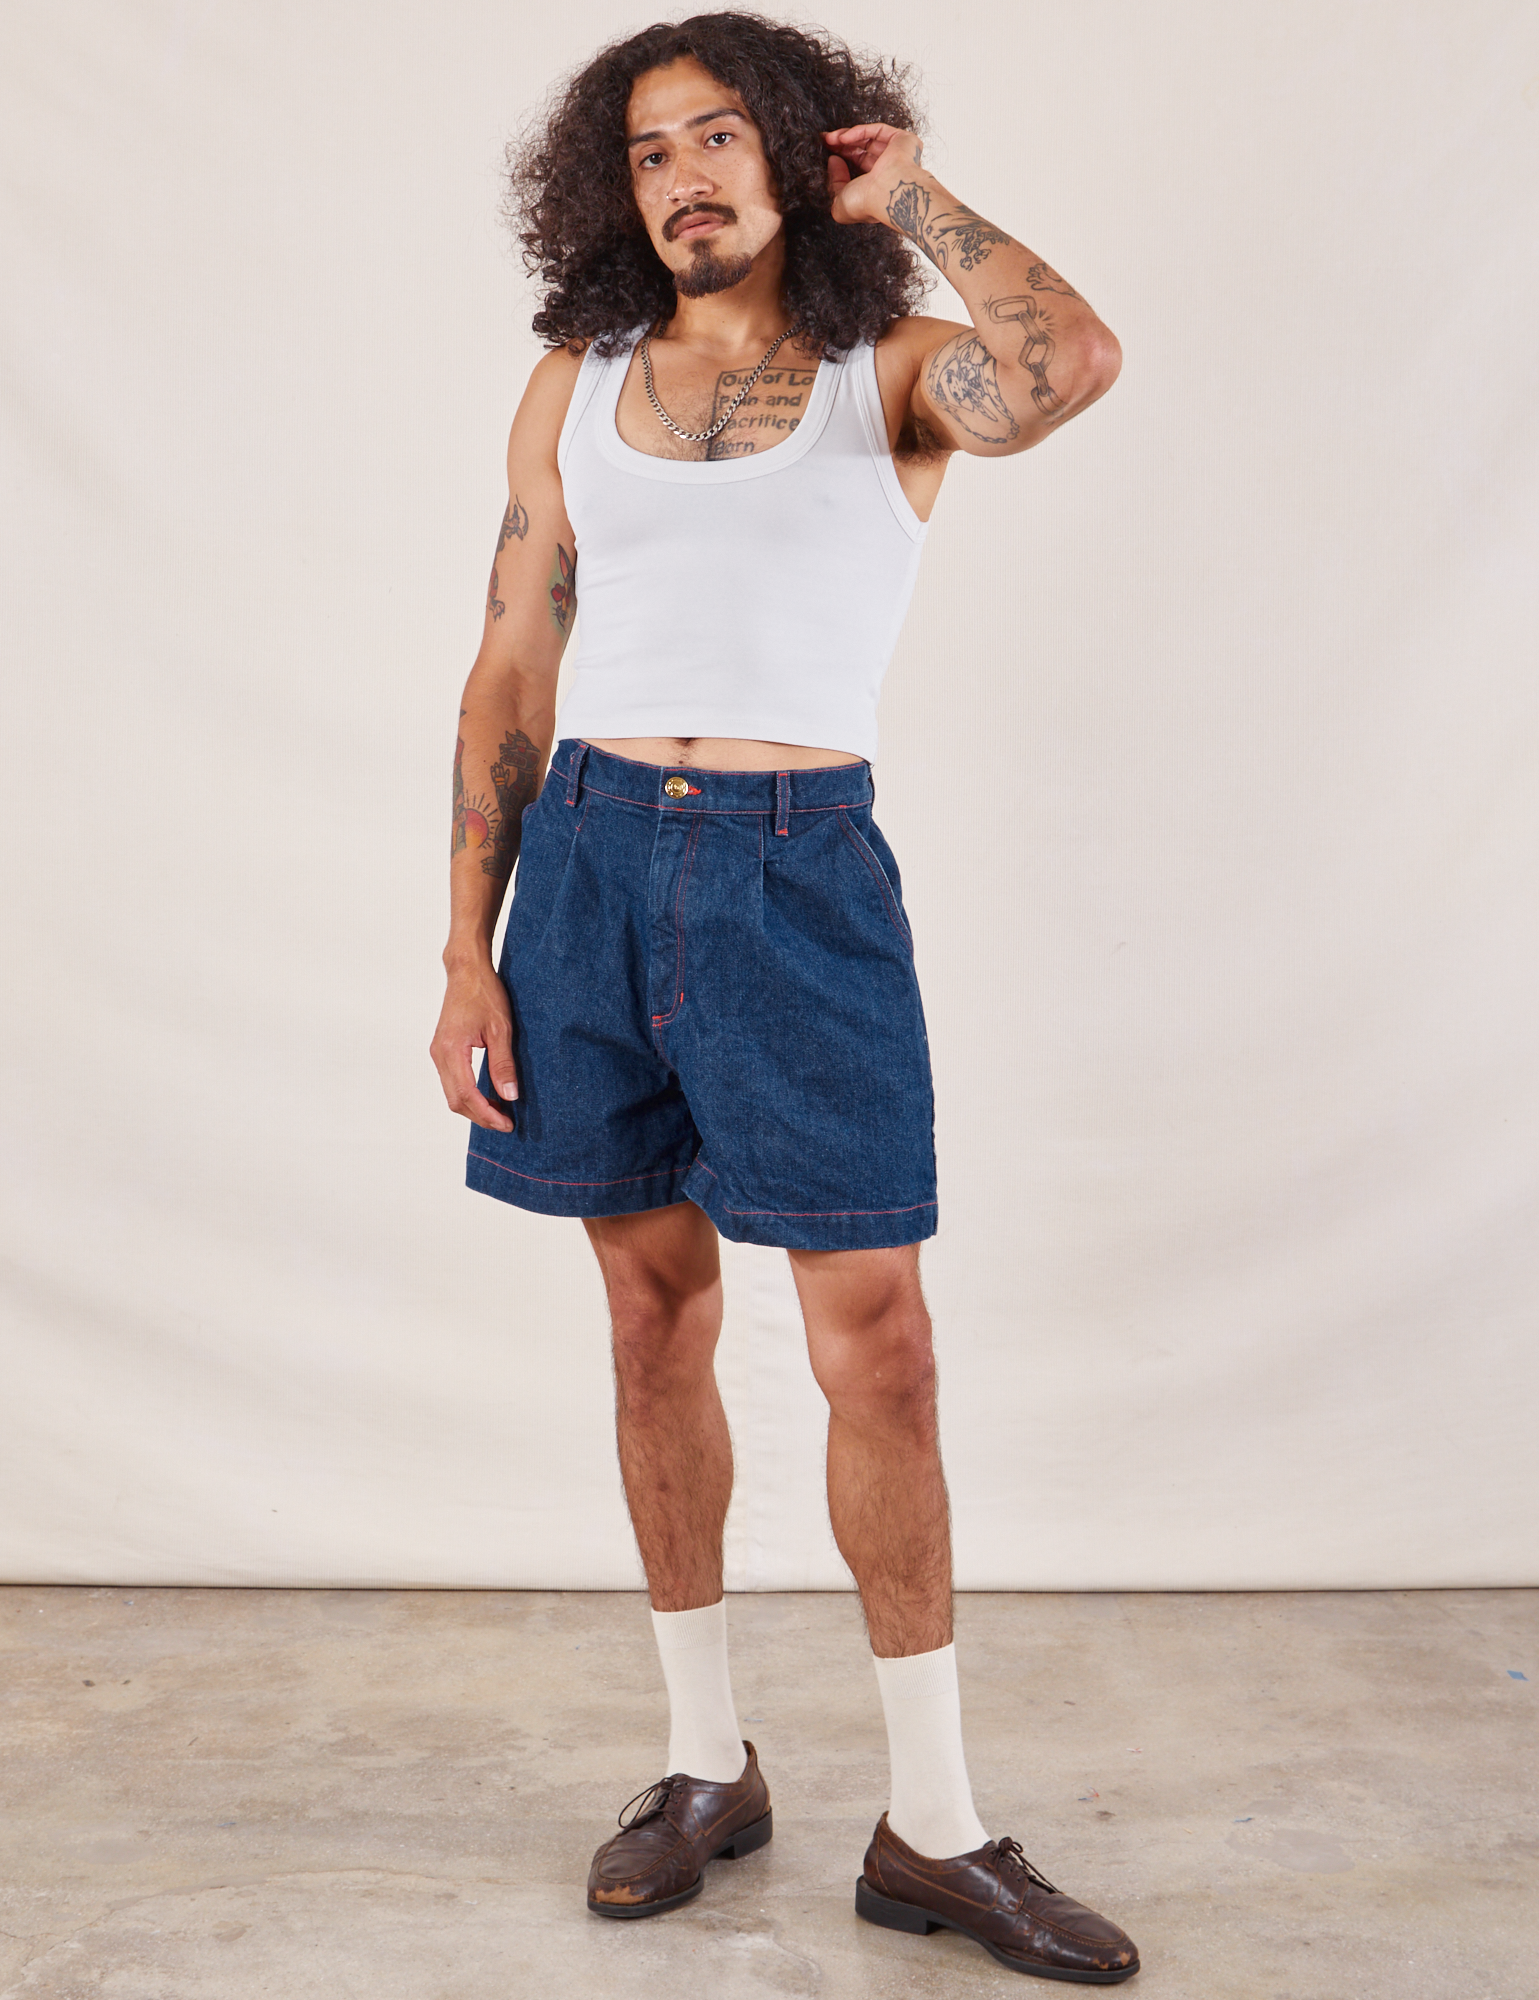 Jesse is wearing Denim Trouser Shorts in Dark Wash paired with Cropped Tank in vintage tee off-white